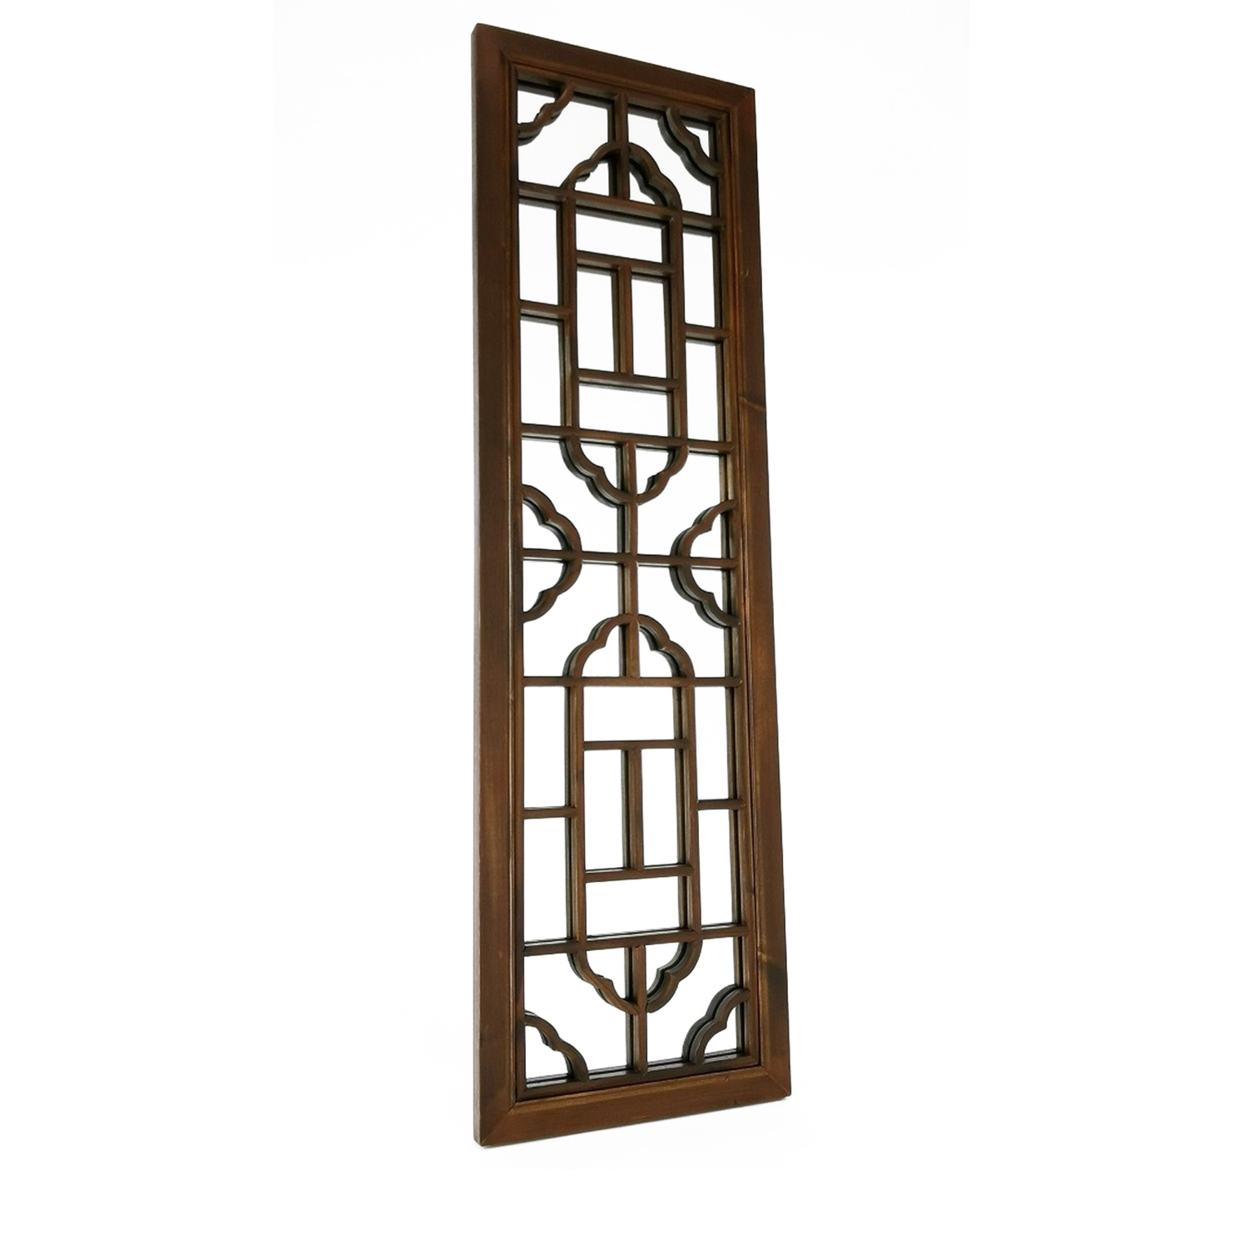 15 Inch Mirror With Cut Out Geometric Motifs And Wooden Frame, Brown- Saltoro Sherpi